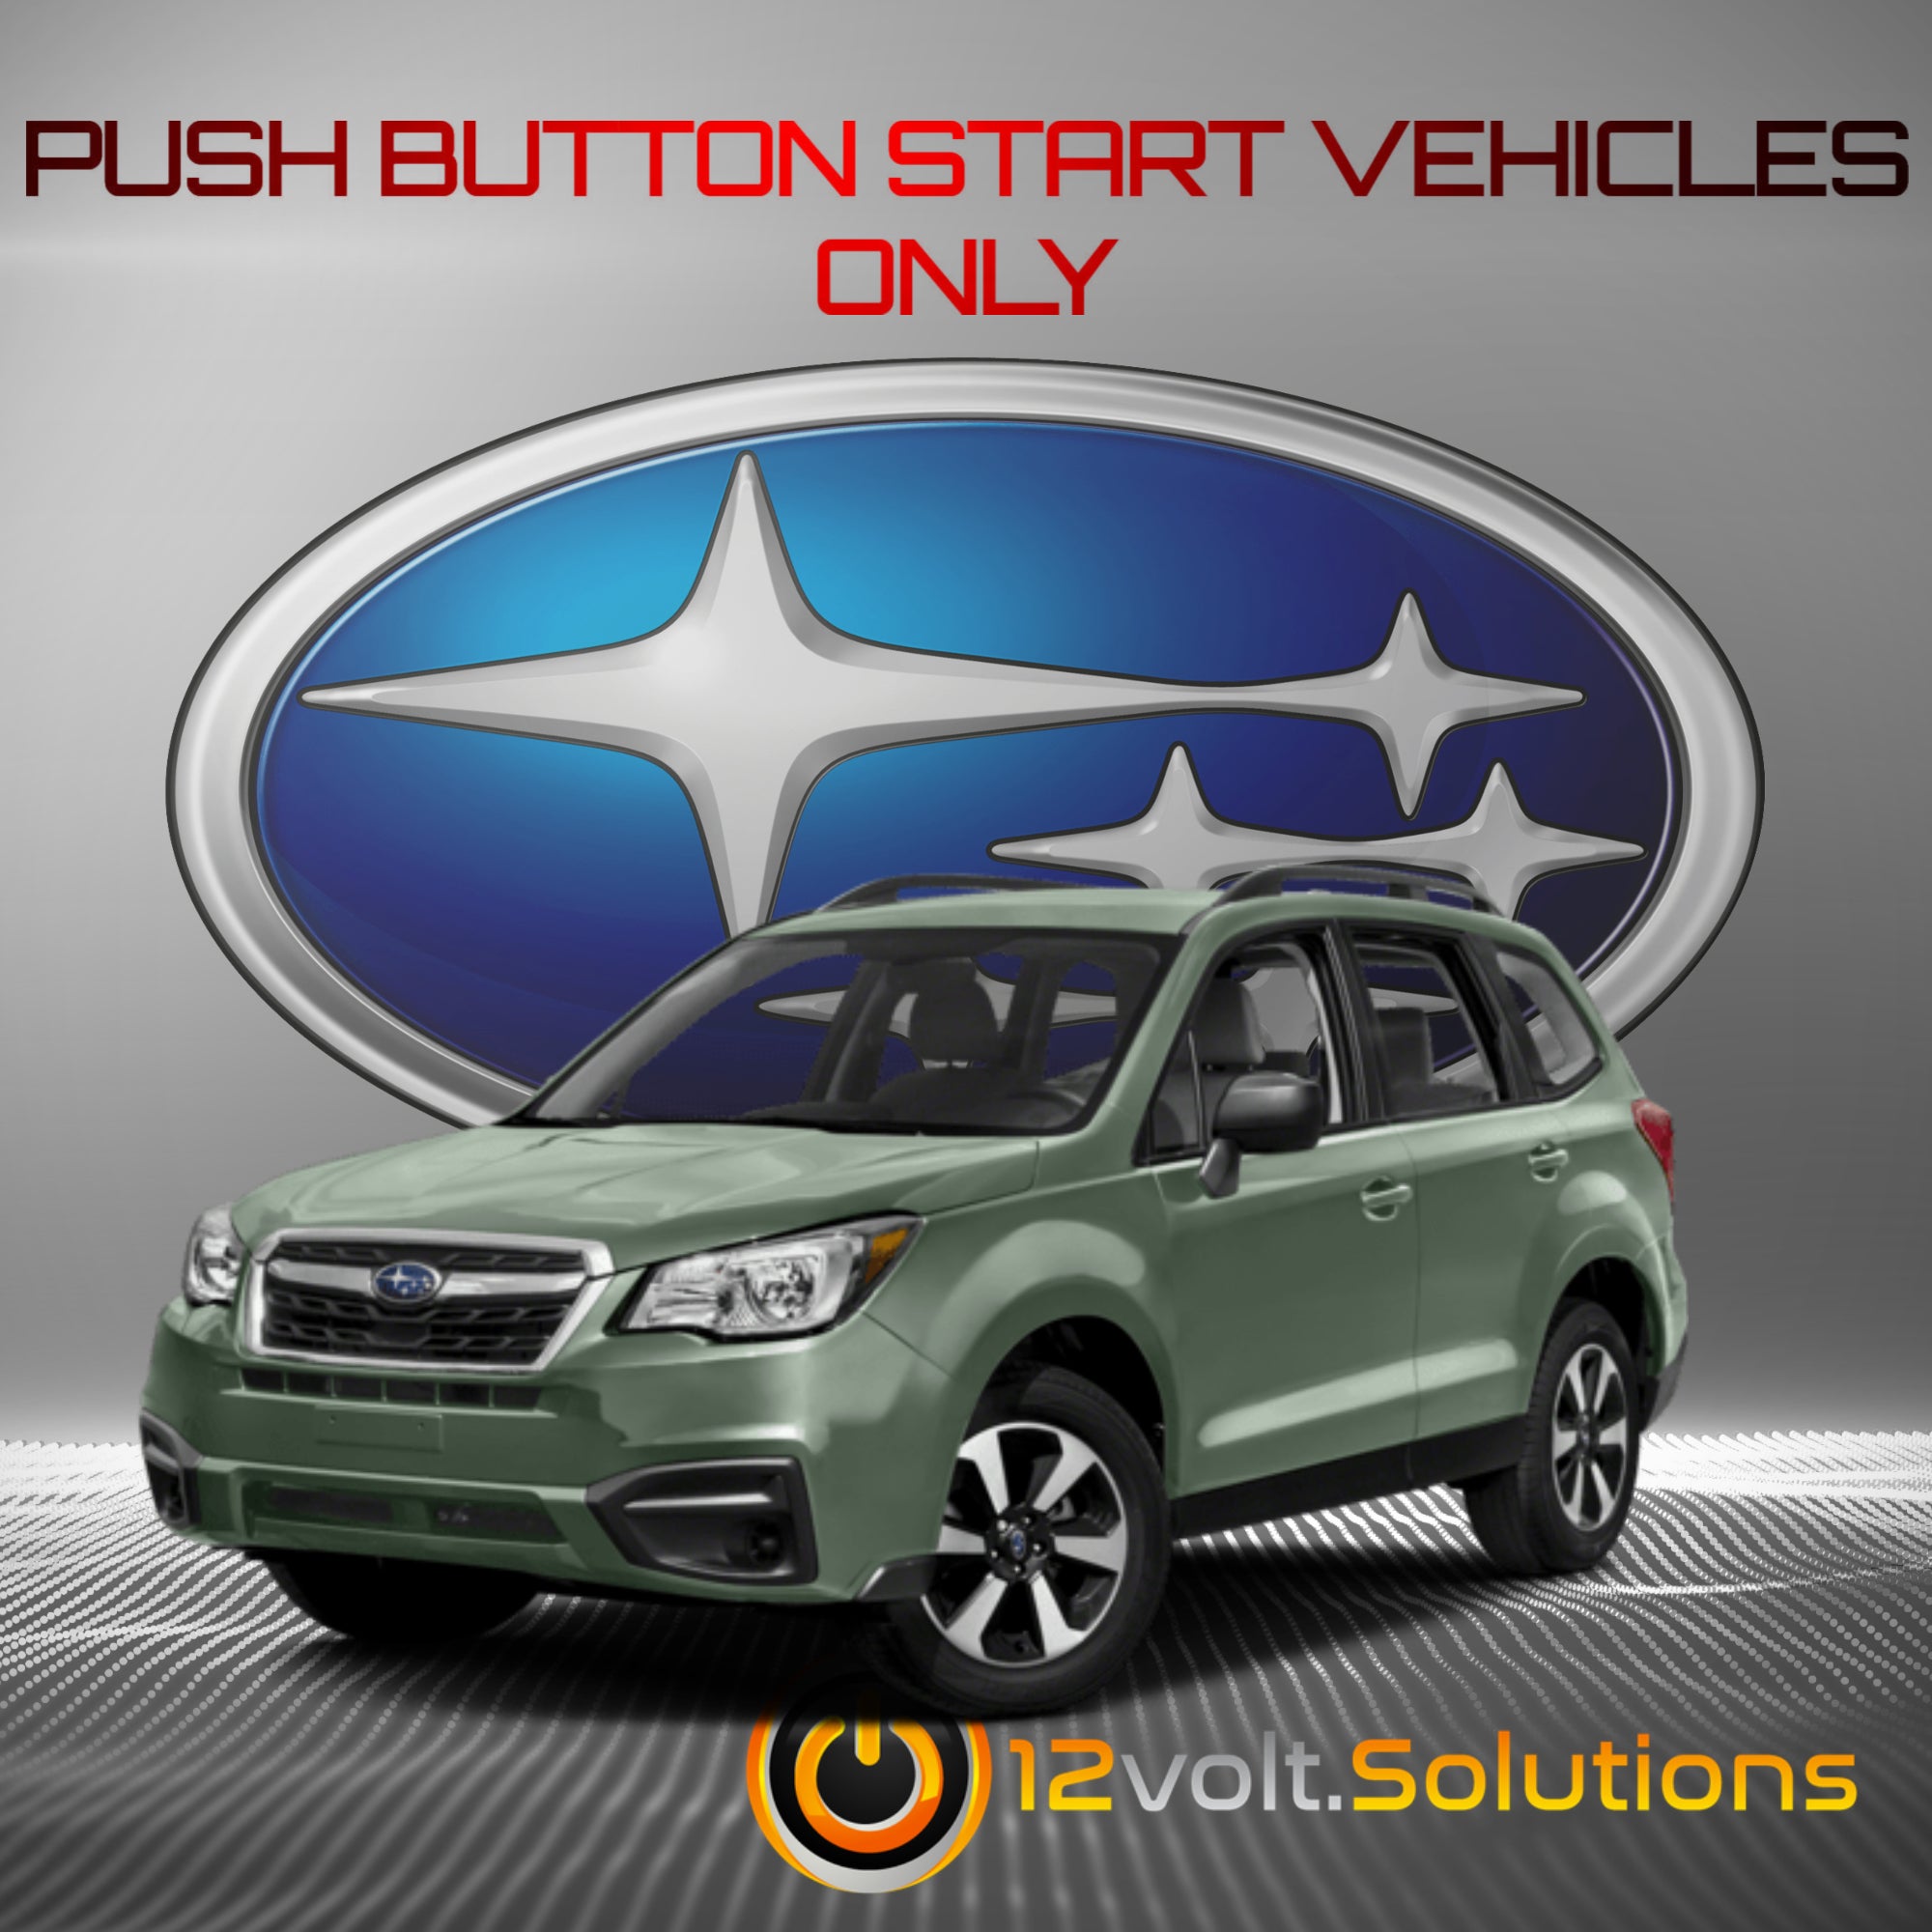 2014-2018 Subaru Forester XT Plug and Play Remote Start Kit (Push Button Start)-12Volt.Solutions